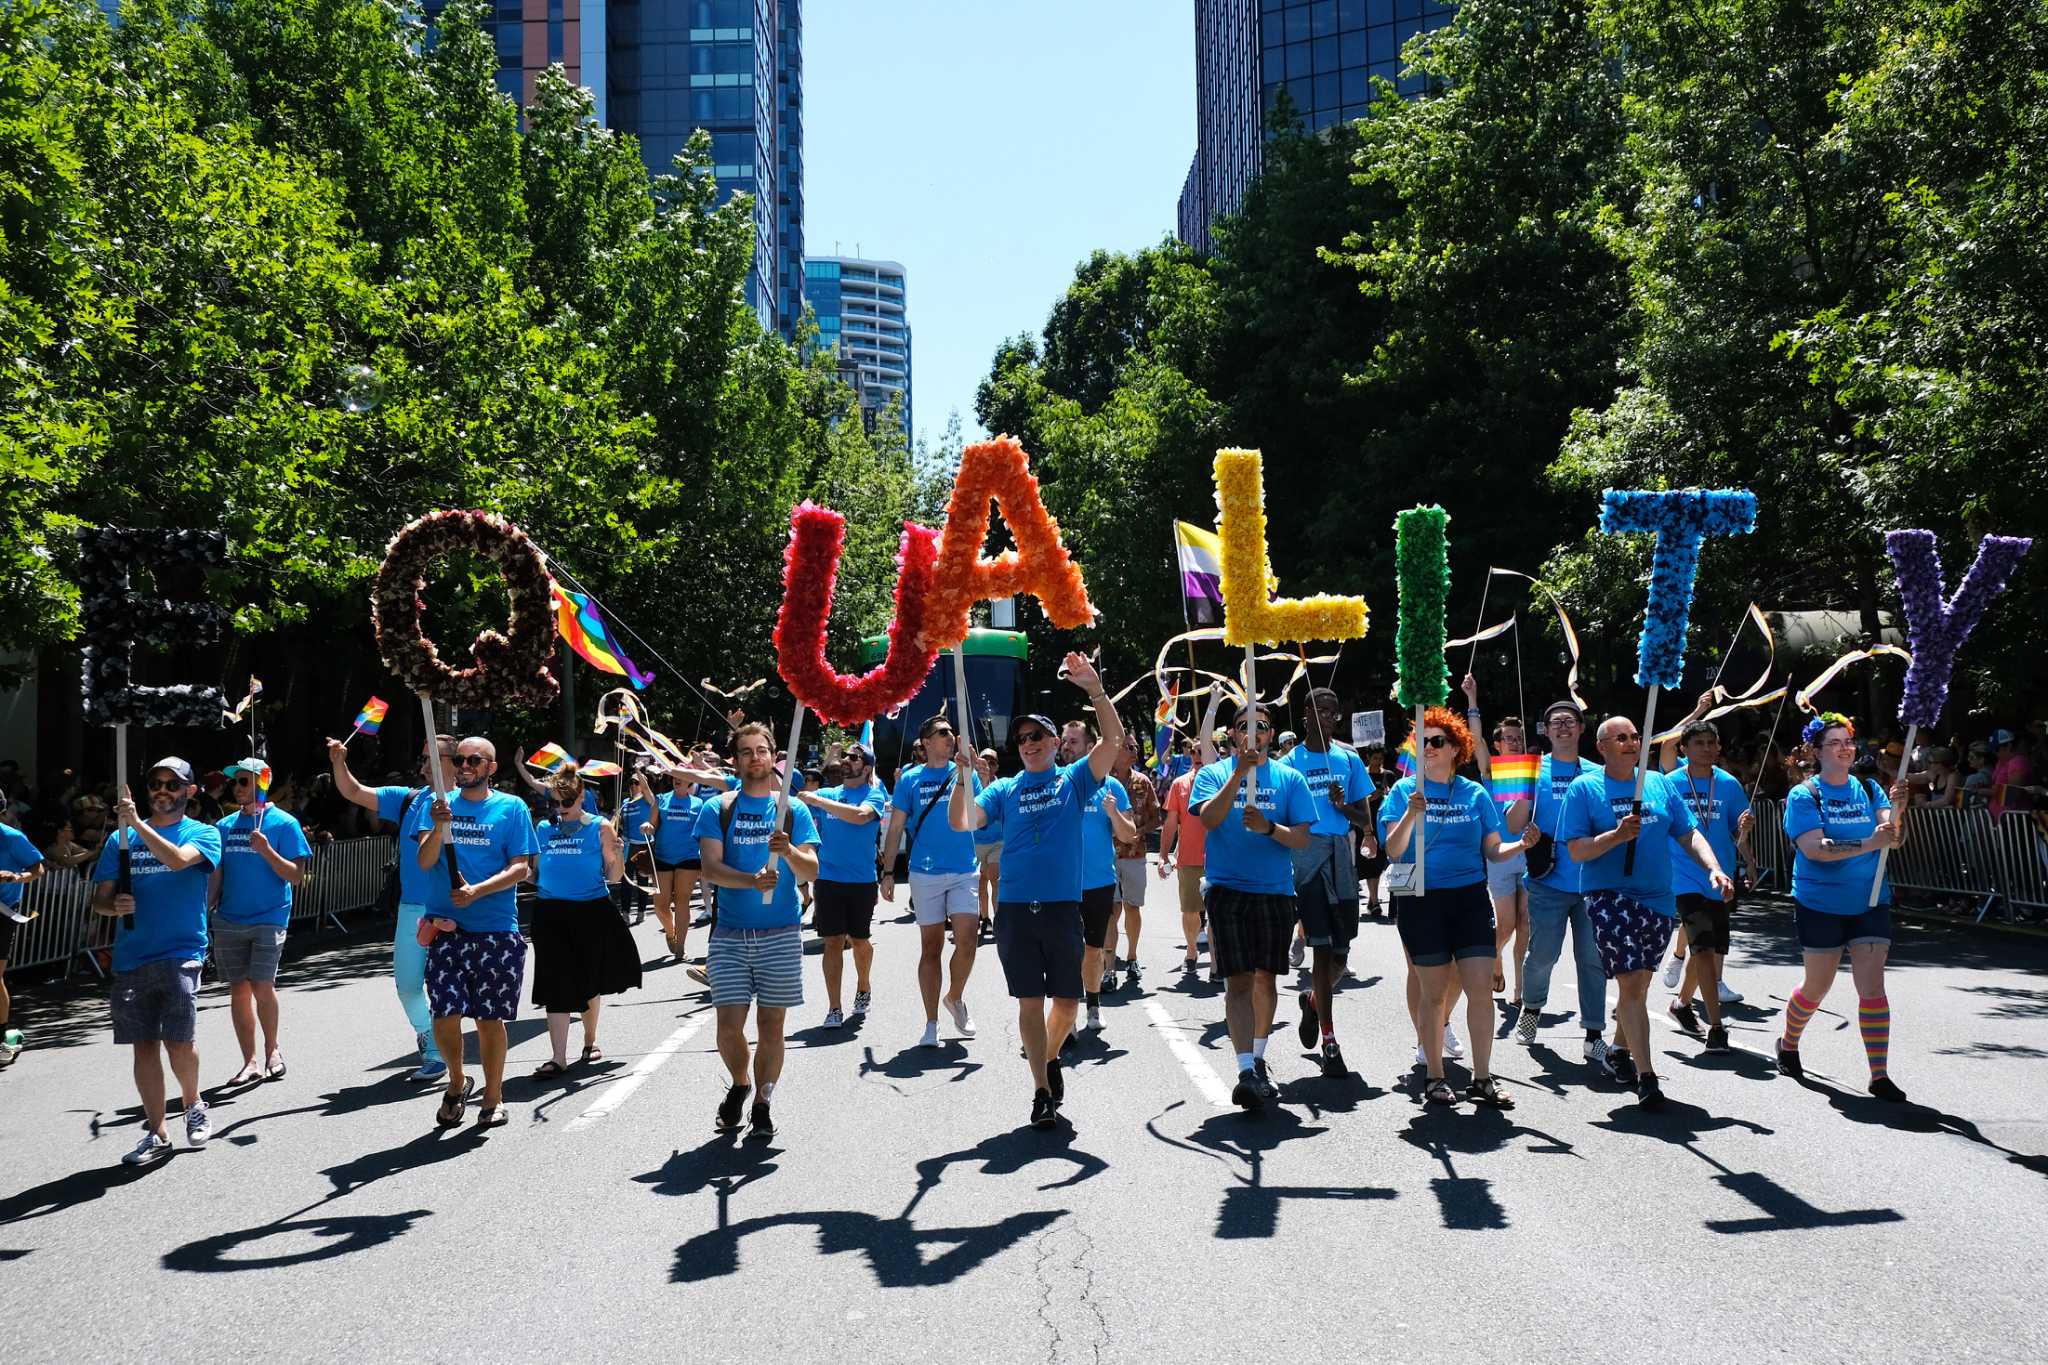 Seattle Pride moves 2021 festivities online as pandemic continues